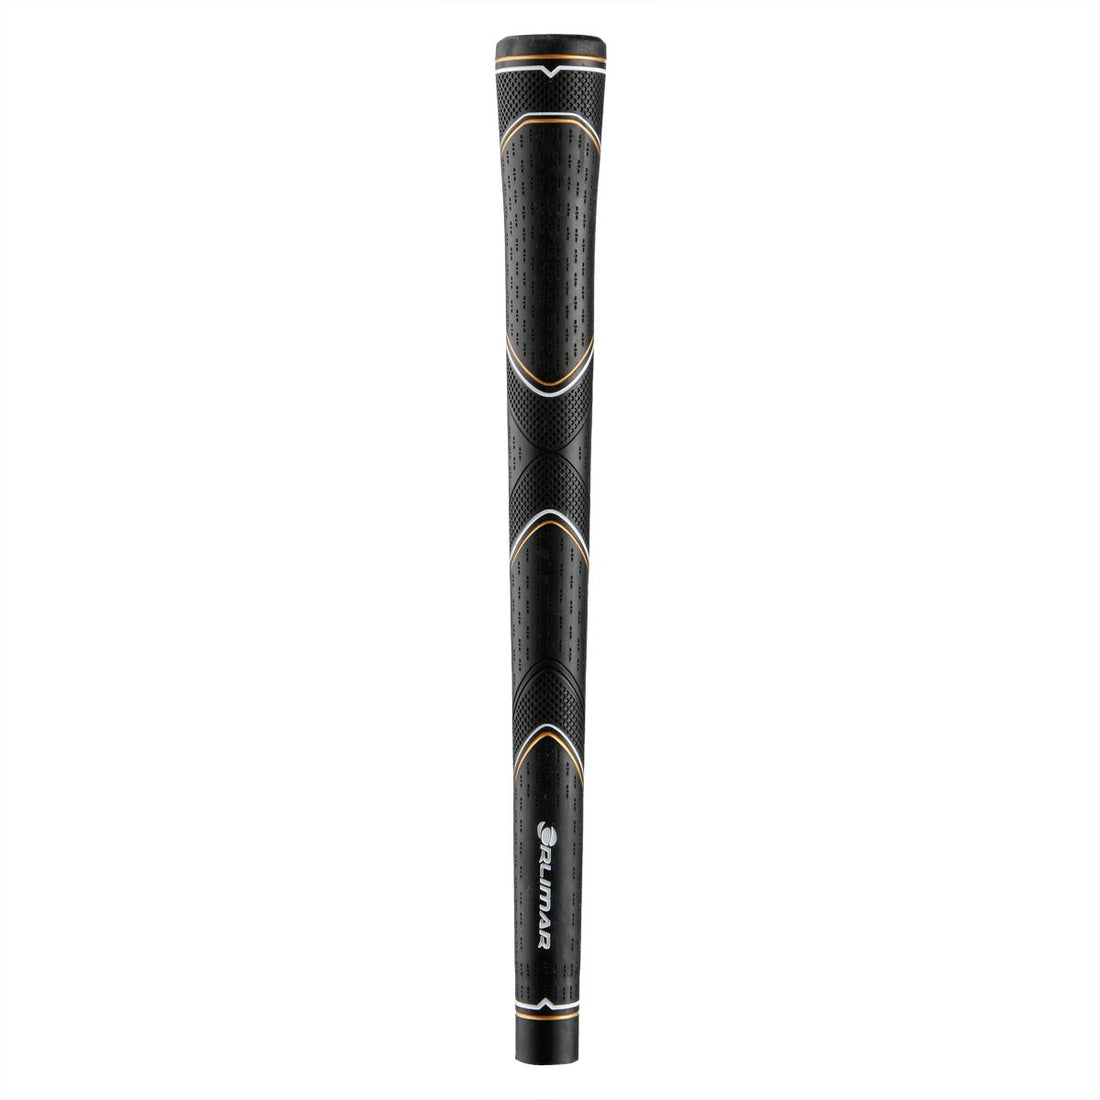 black Orlimar golf grip with with and golf accent colors